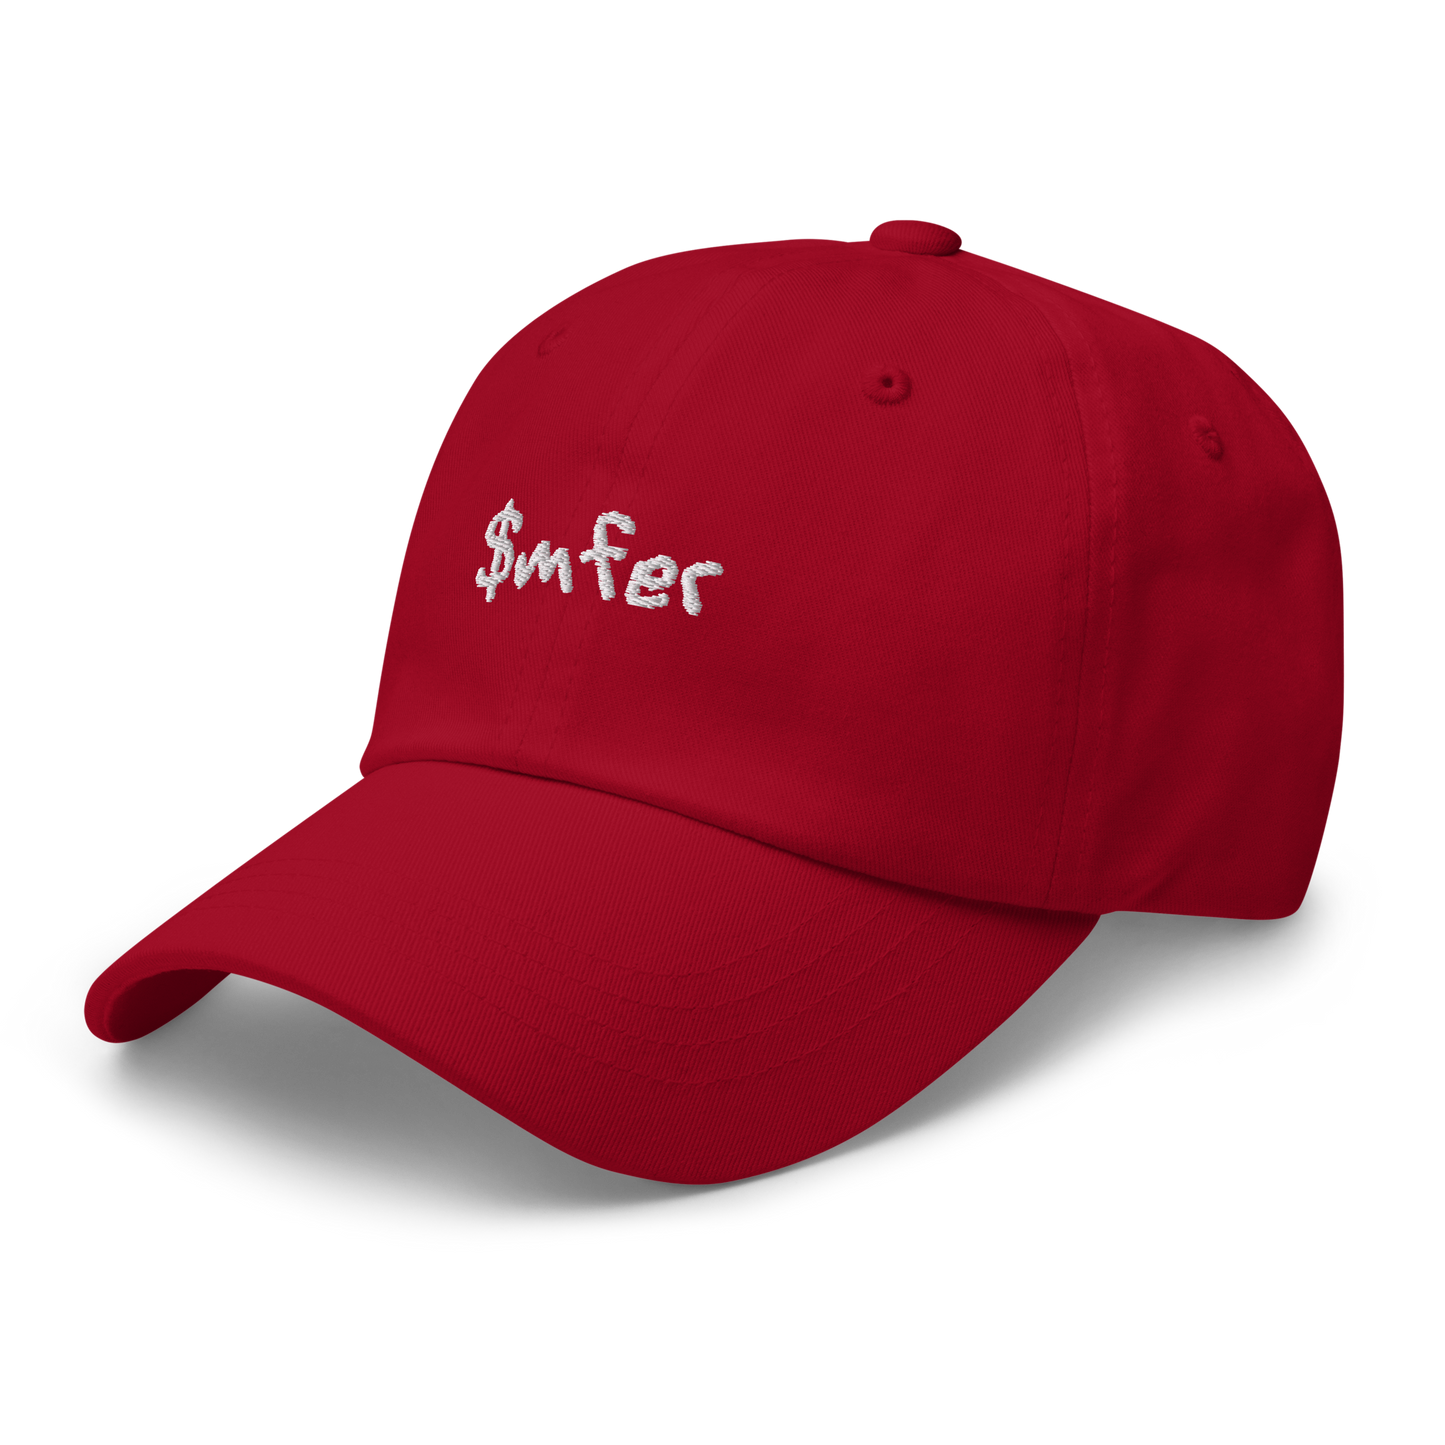 $mfer hat white text